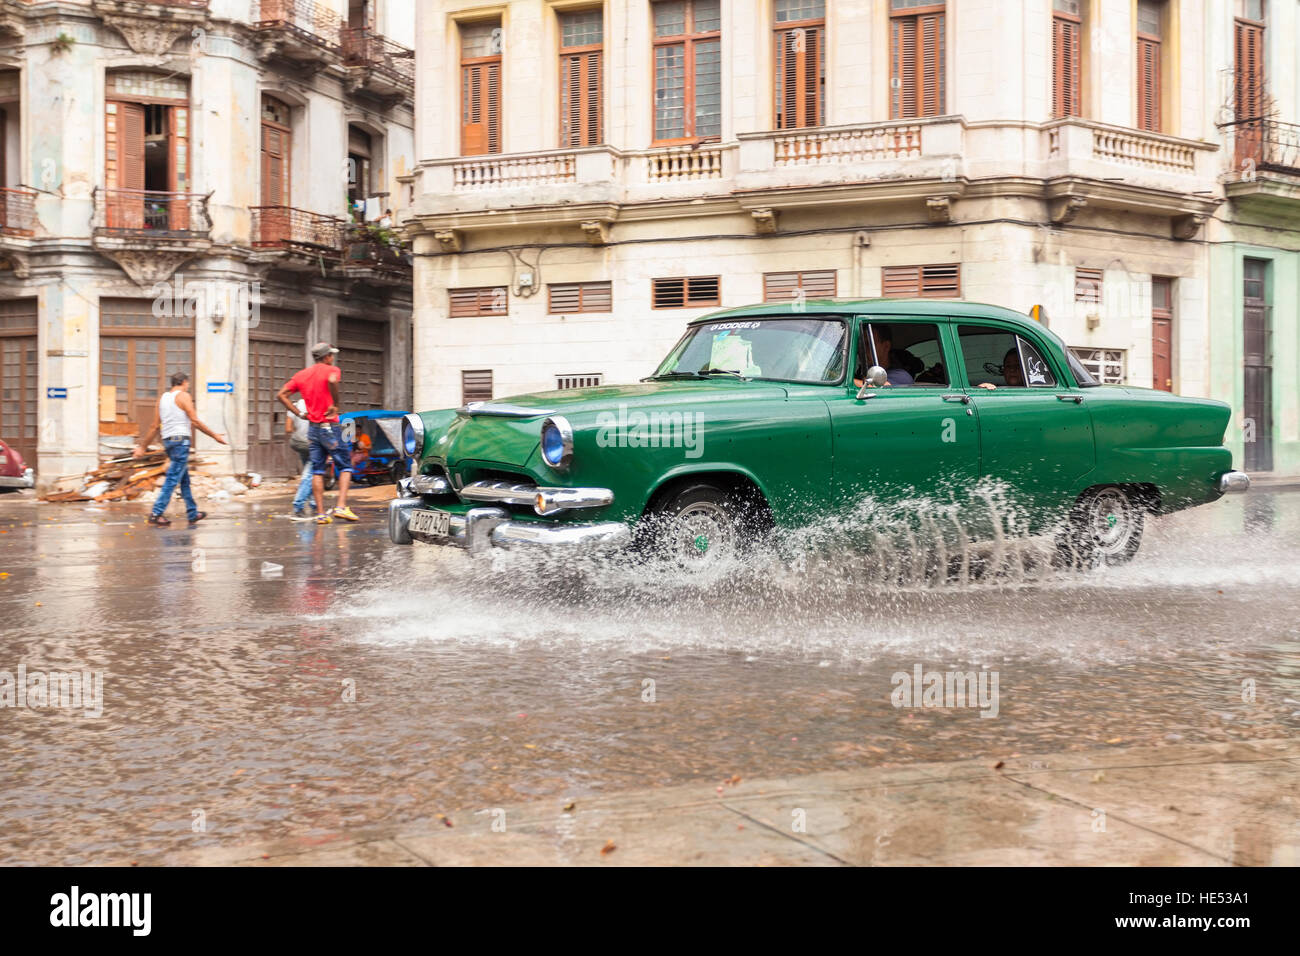 A green classic car passes through a puddle after a a heavy rainfall in Old Havana, Cuba. Stock Photo